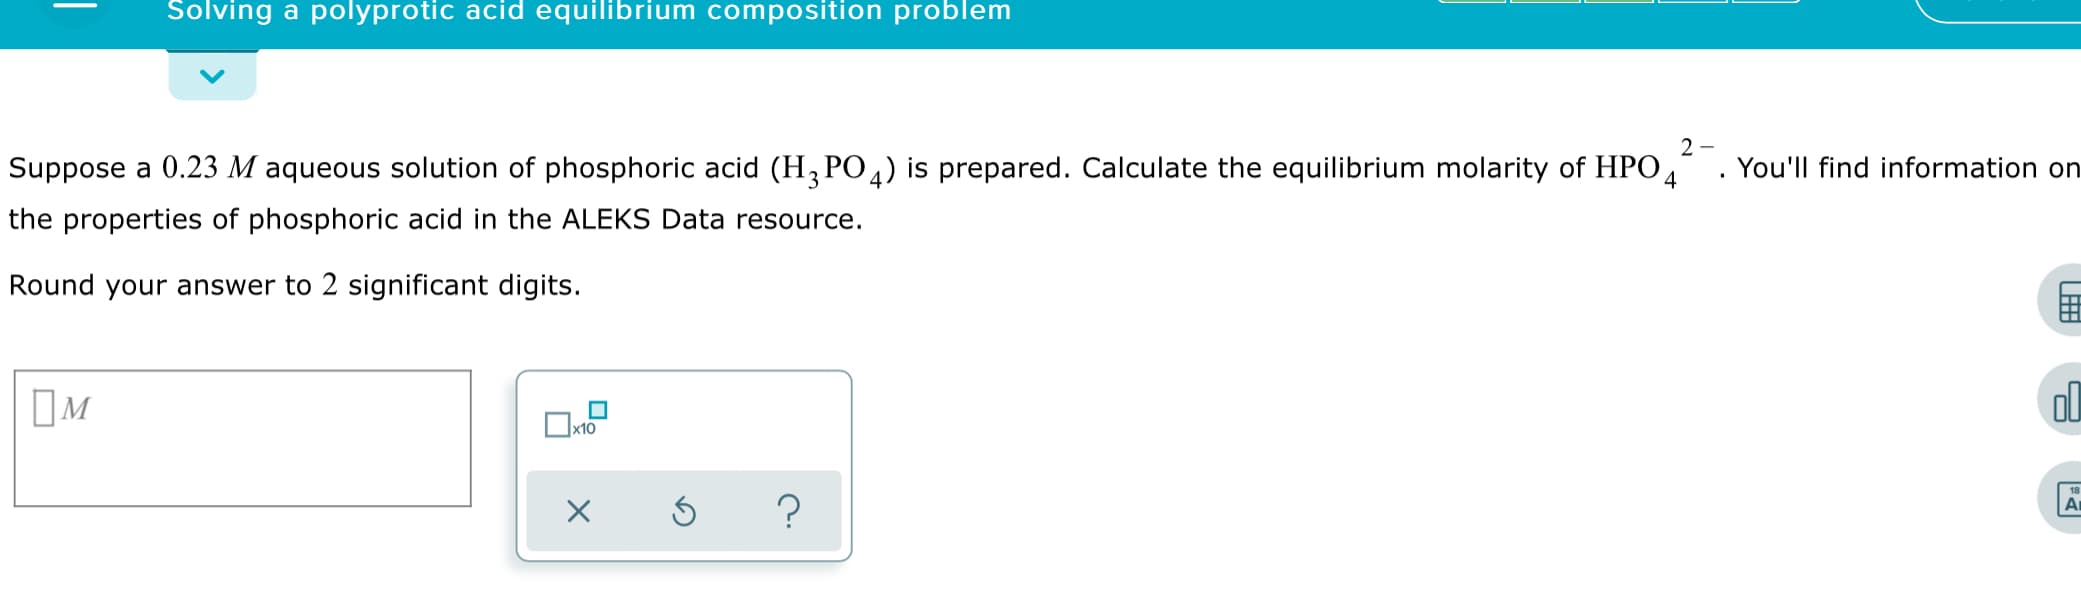 Solving a polyprotic acid equilibrium composition problem
2 -
Suppose a 0.23 M aqueous solution of phosphoric acid (H, PO4) is prepared. Calculate the equilibrium molarity of HPO,
the properties of phosphoric acid in the ALEKS Data resource.
You'll find information on
Round your answer to 2 significant digits.
ol
